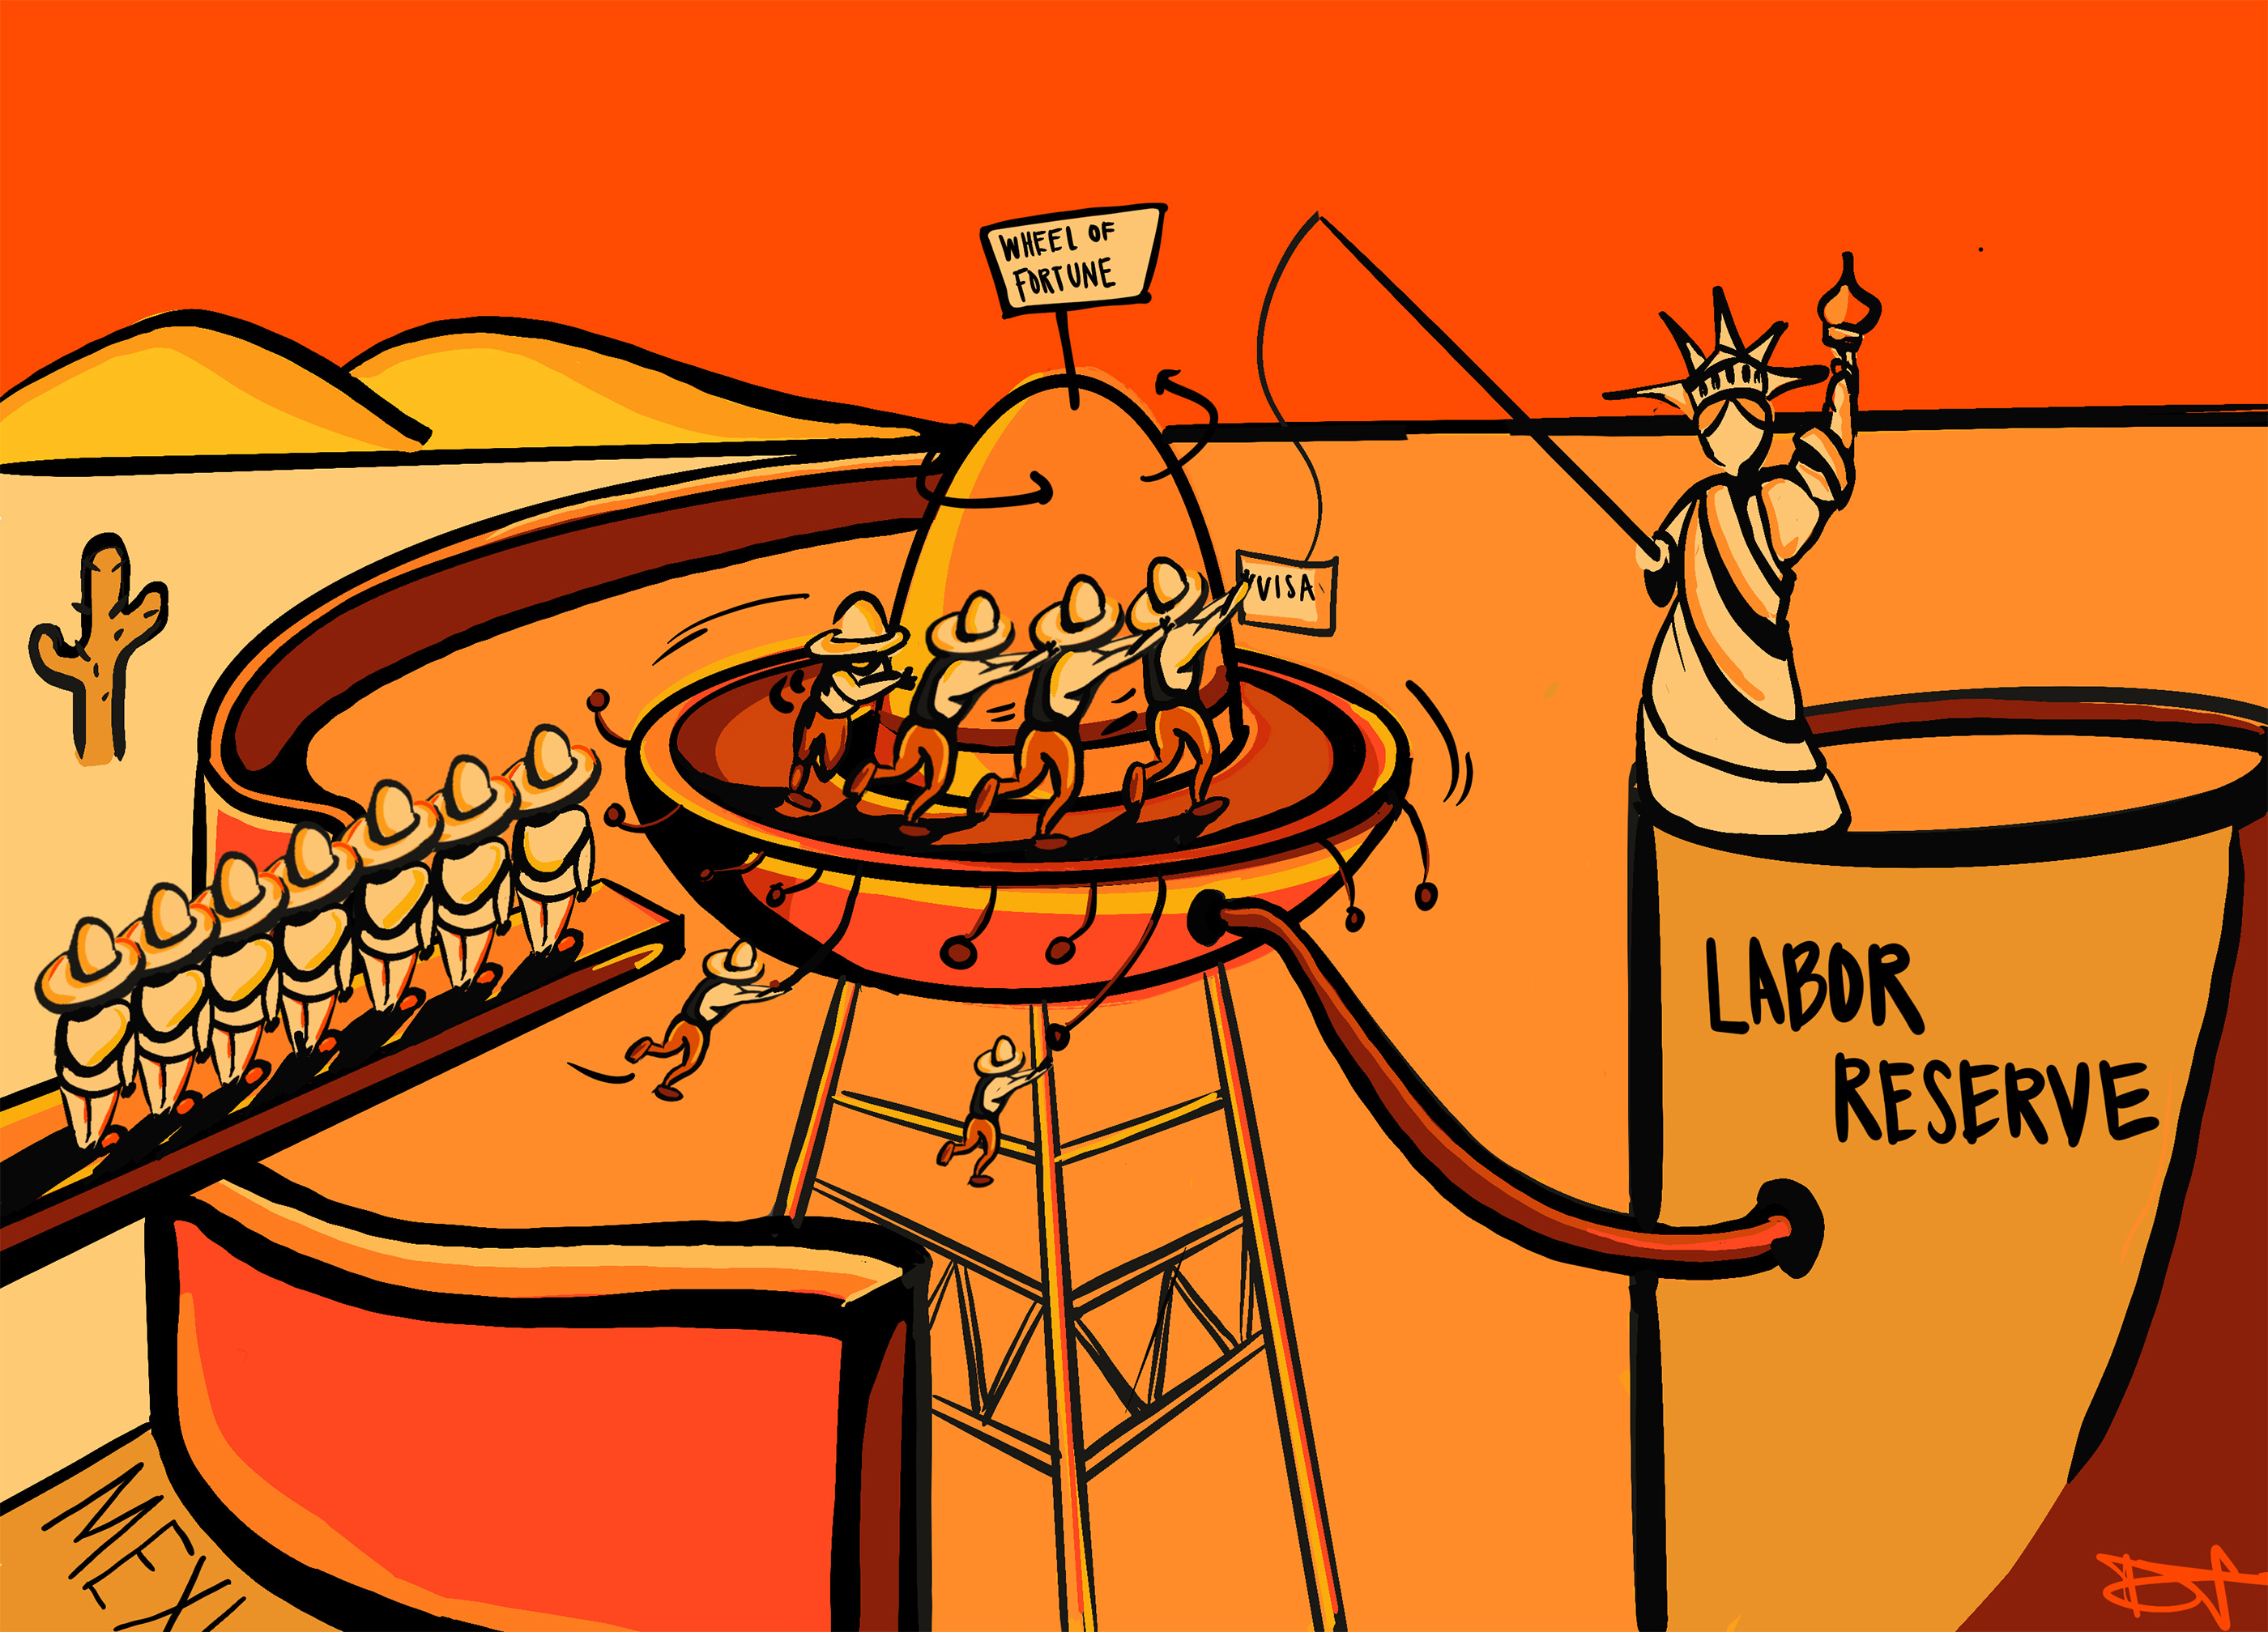 more finished illustration of above sketch showing Mexican laborers on a kind of carousel